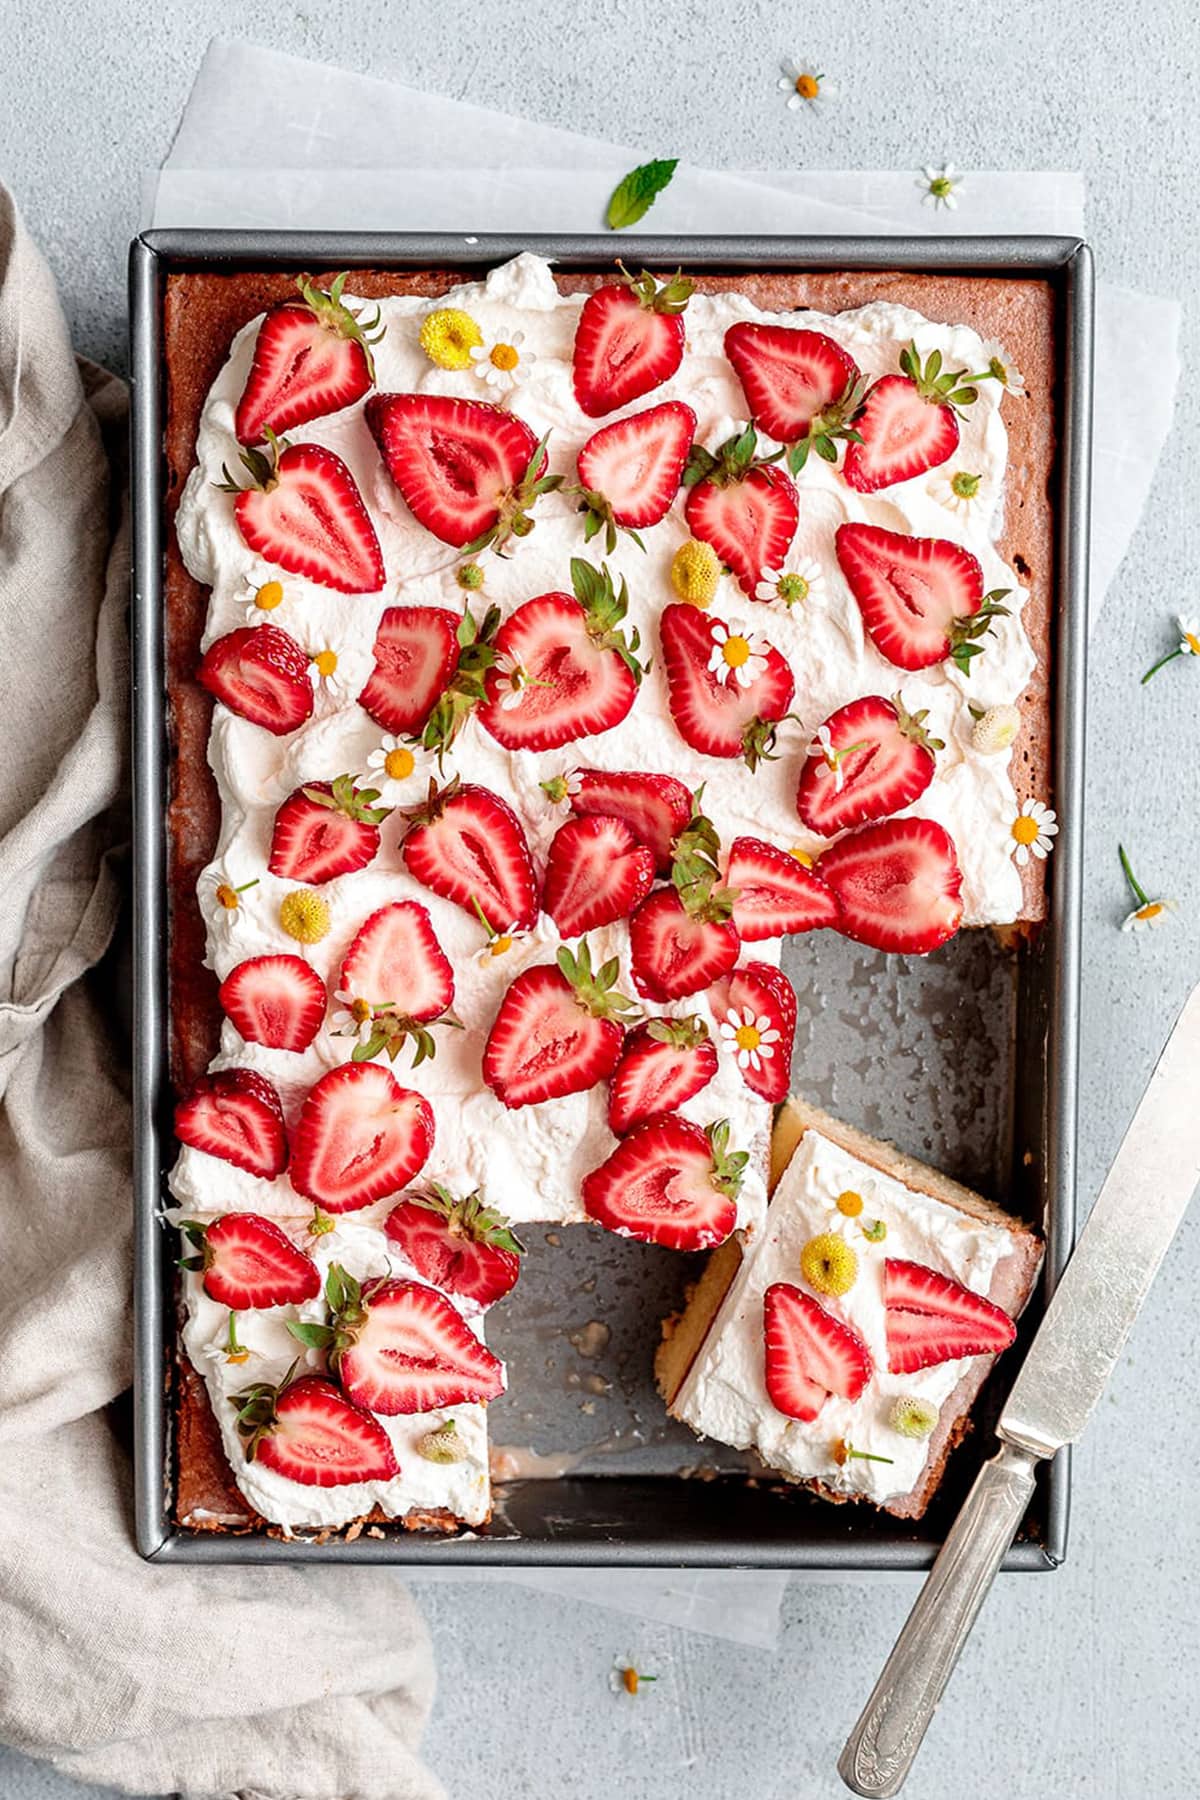 Strawberry Tres Leches Cake is a light and spongy cake that is soaked in a sweet strawberry three milks mixture. Topped with fresh whipped cream and sliced strawberries.
